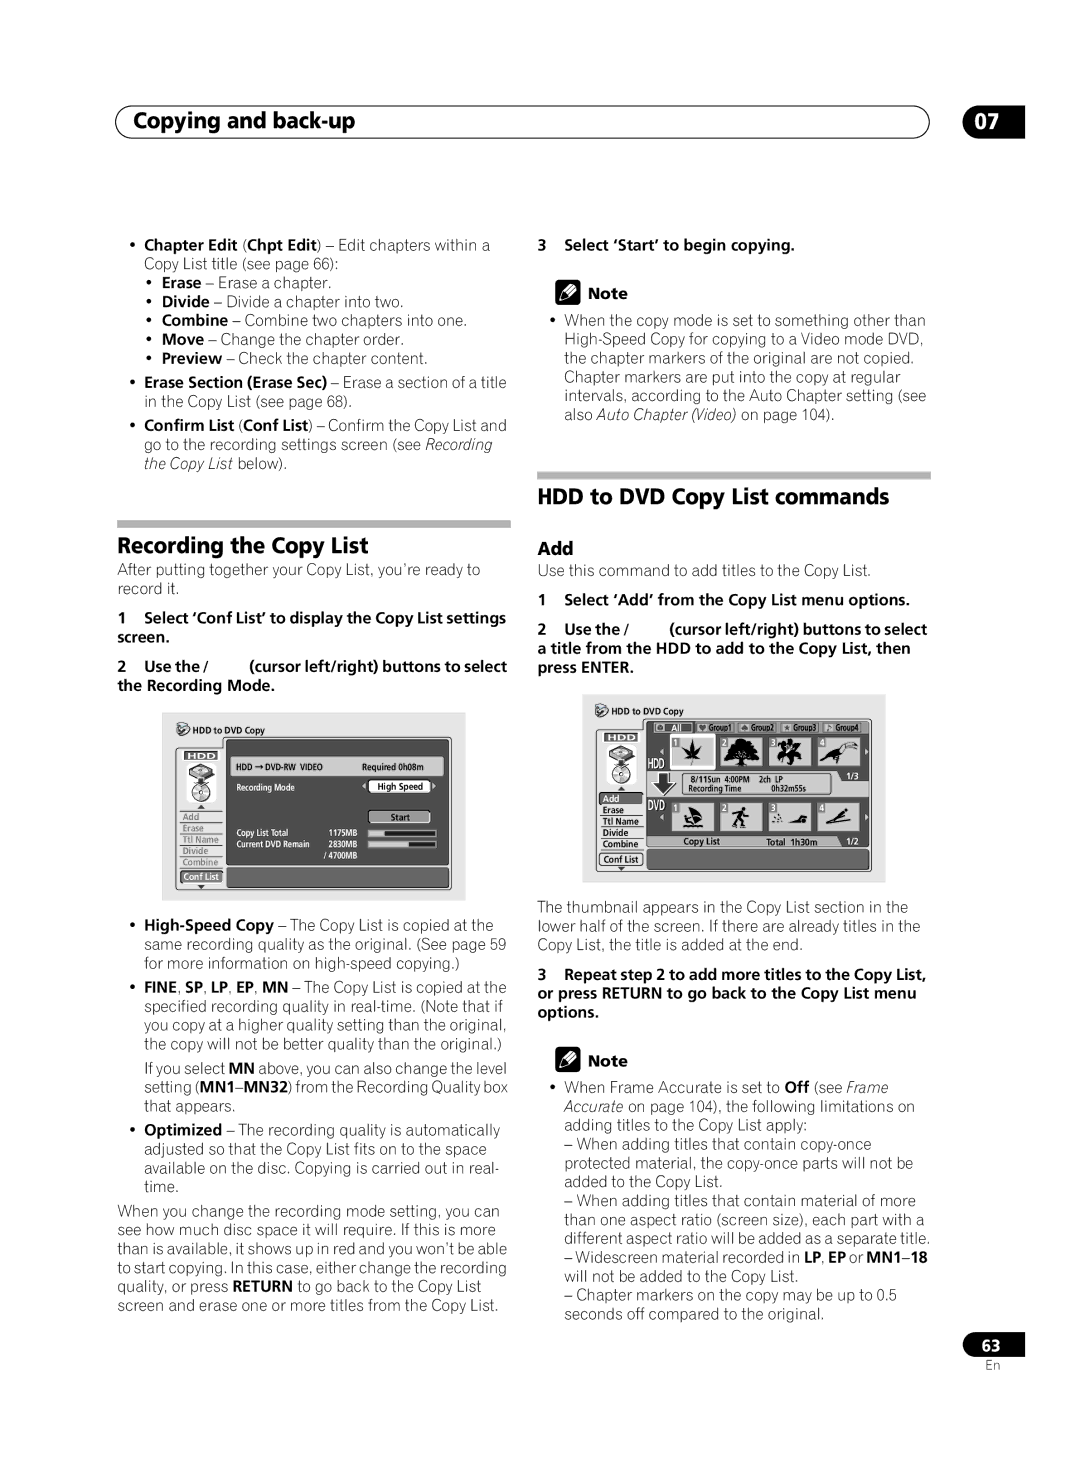 Pioneer PRV-9200 Recording the Copy List, HDD to DVD Copy List commands, Add, Select ‘Start’ to begin copying 